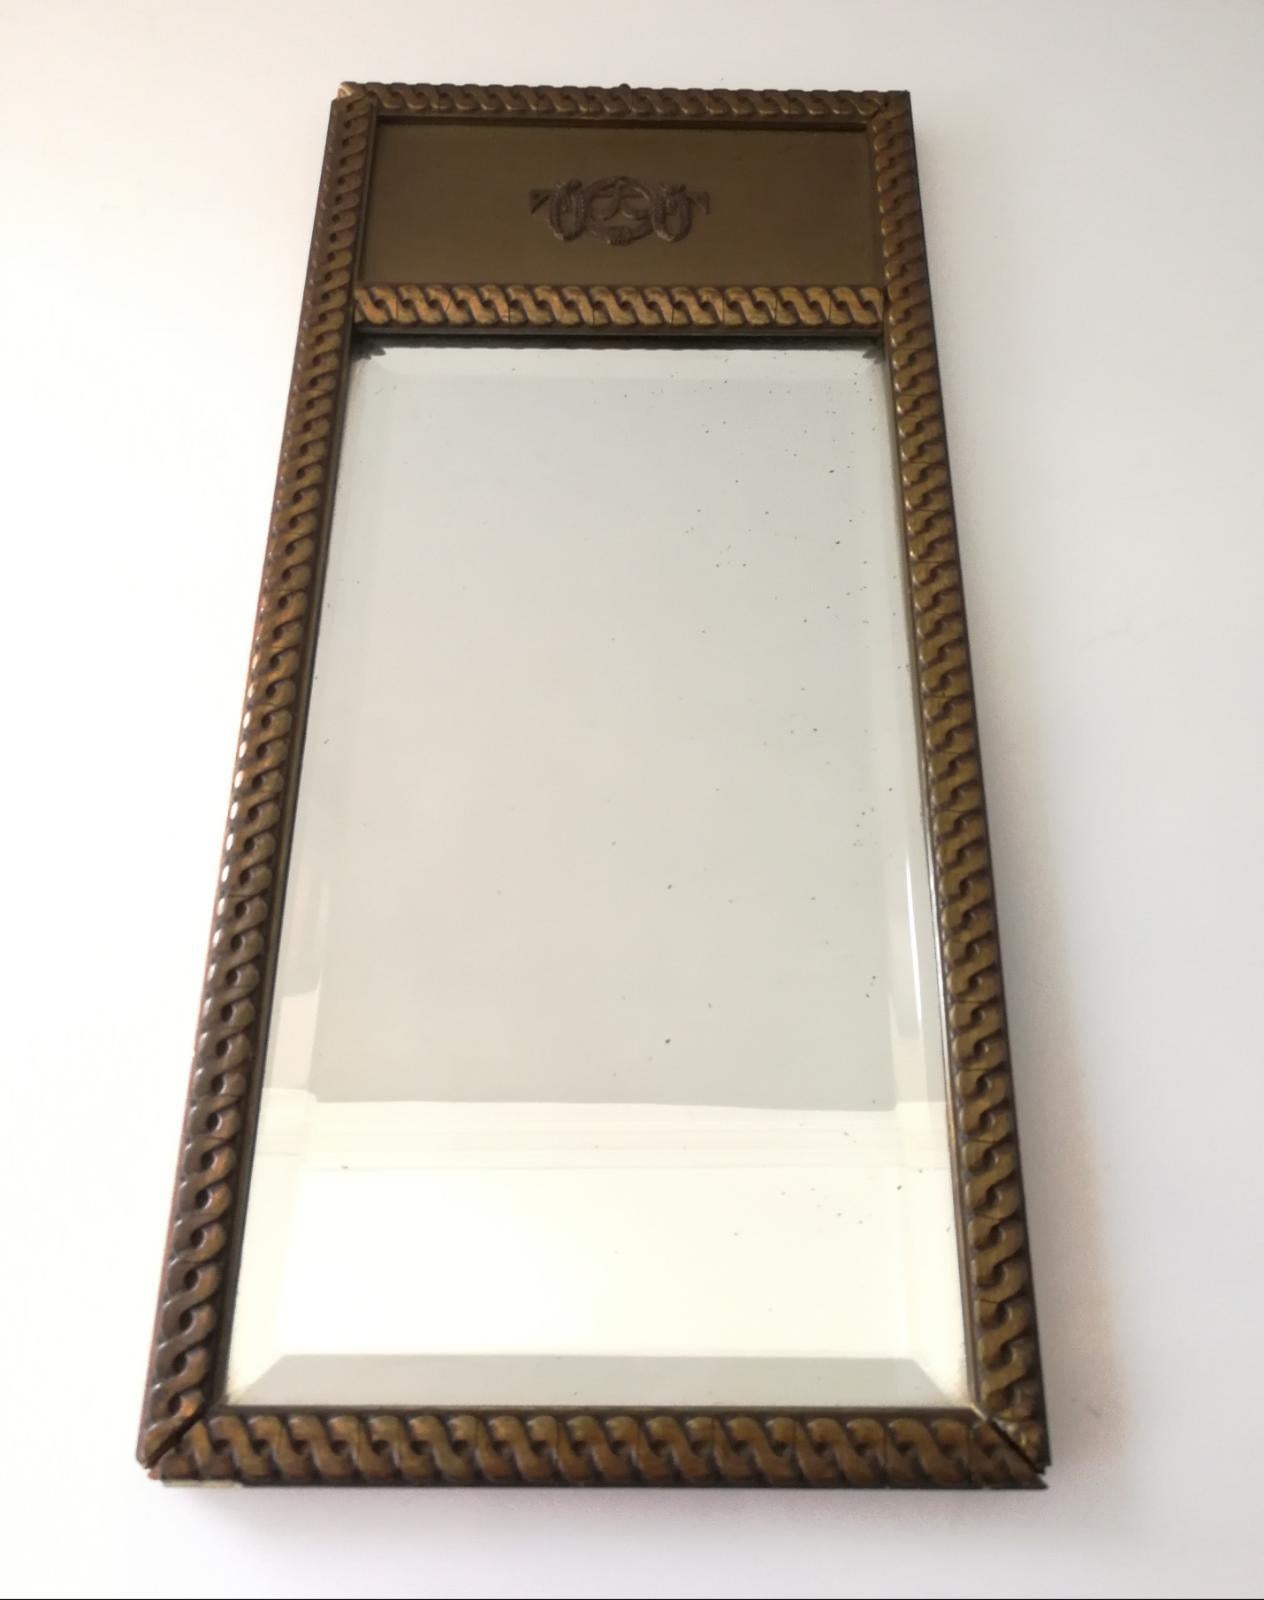 This elegant 1915 French mirror is a real gem. With its measurements of 36 cm x 17 cm, it is perfect for decorating any space with a touch of Classic and sophisticated style. Despite having a slightly open corner and a small mark on one side, this